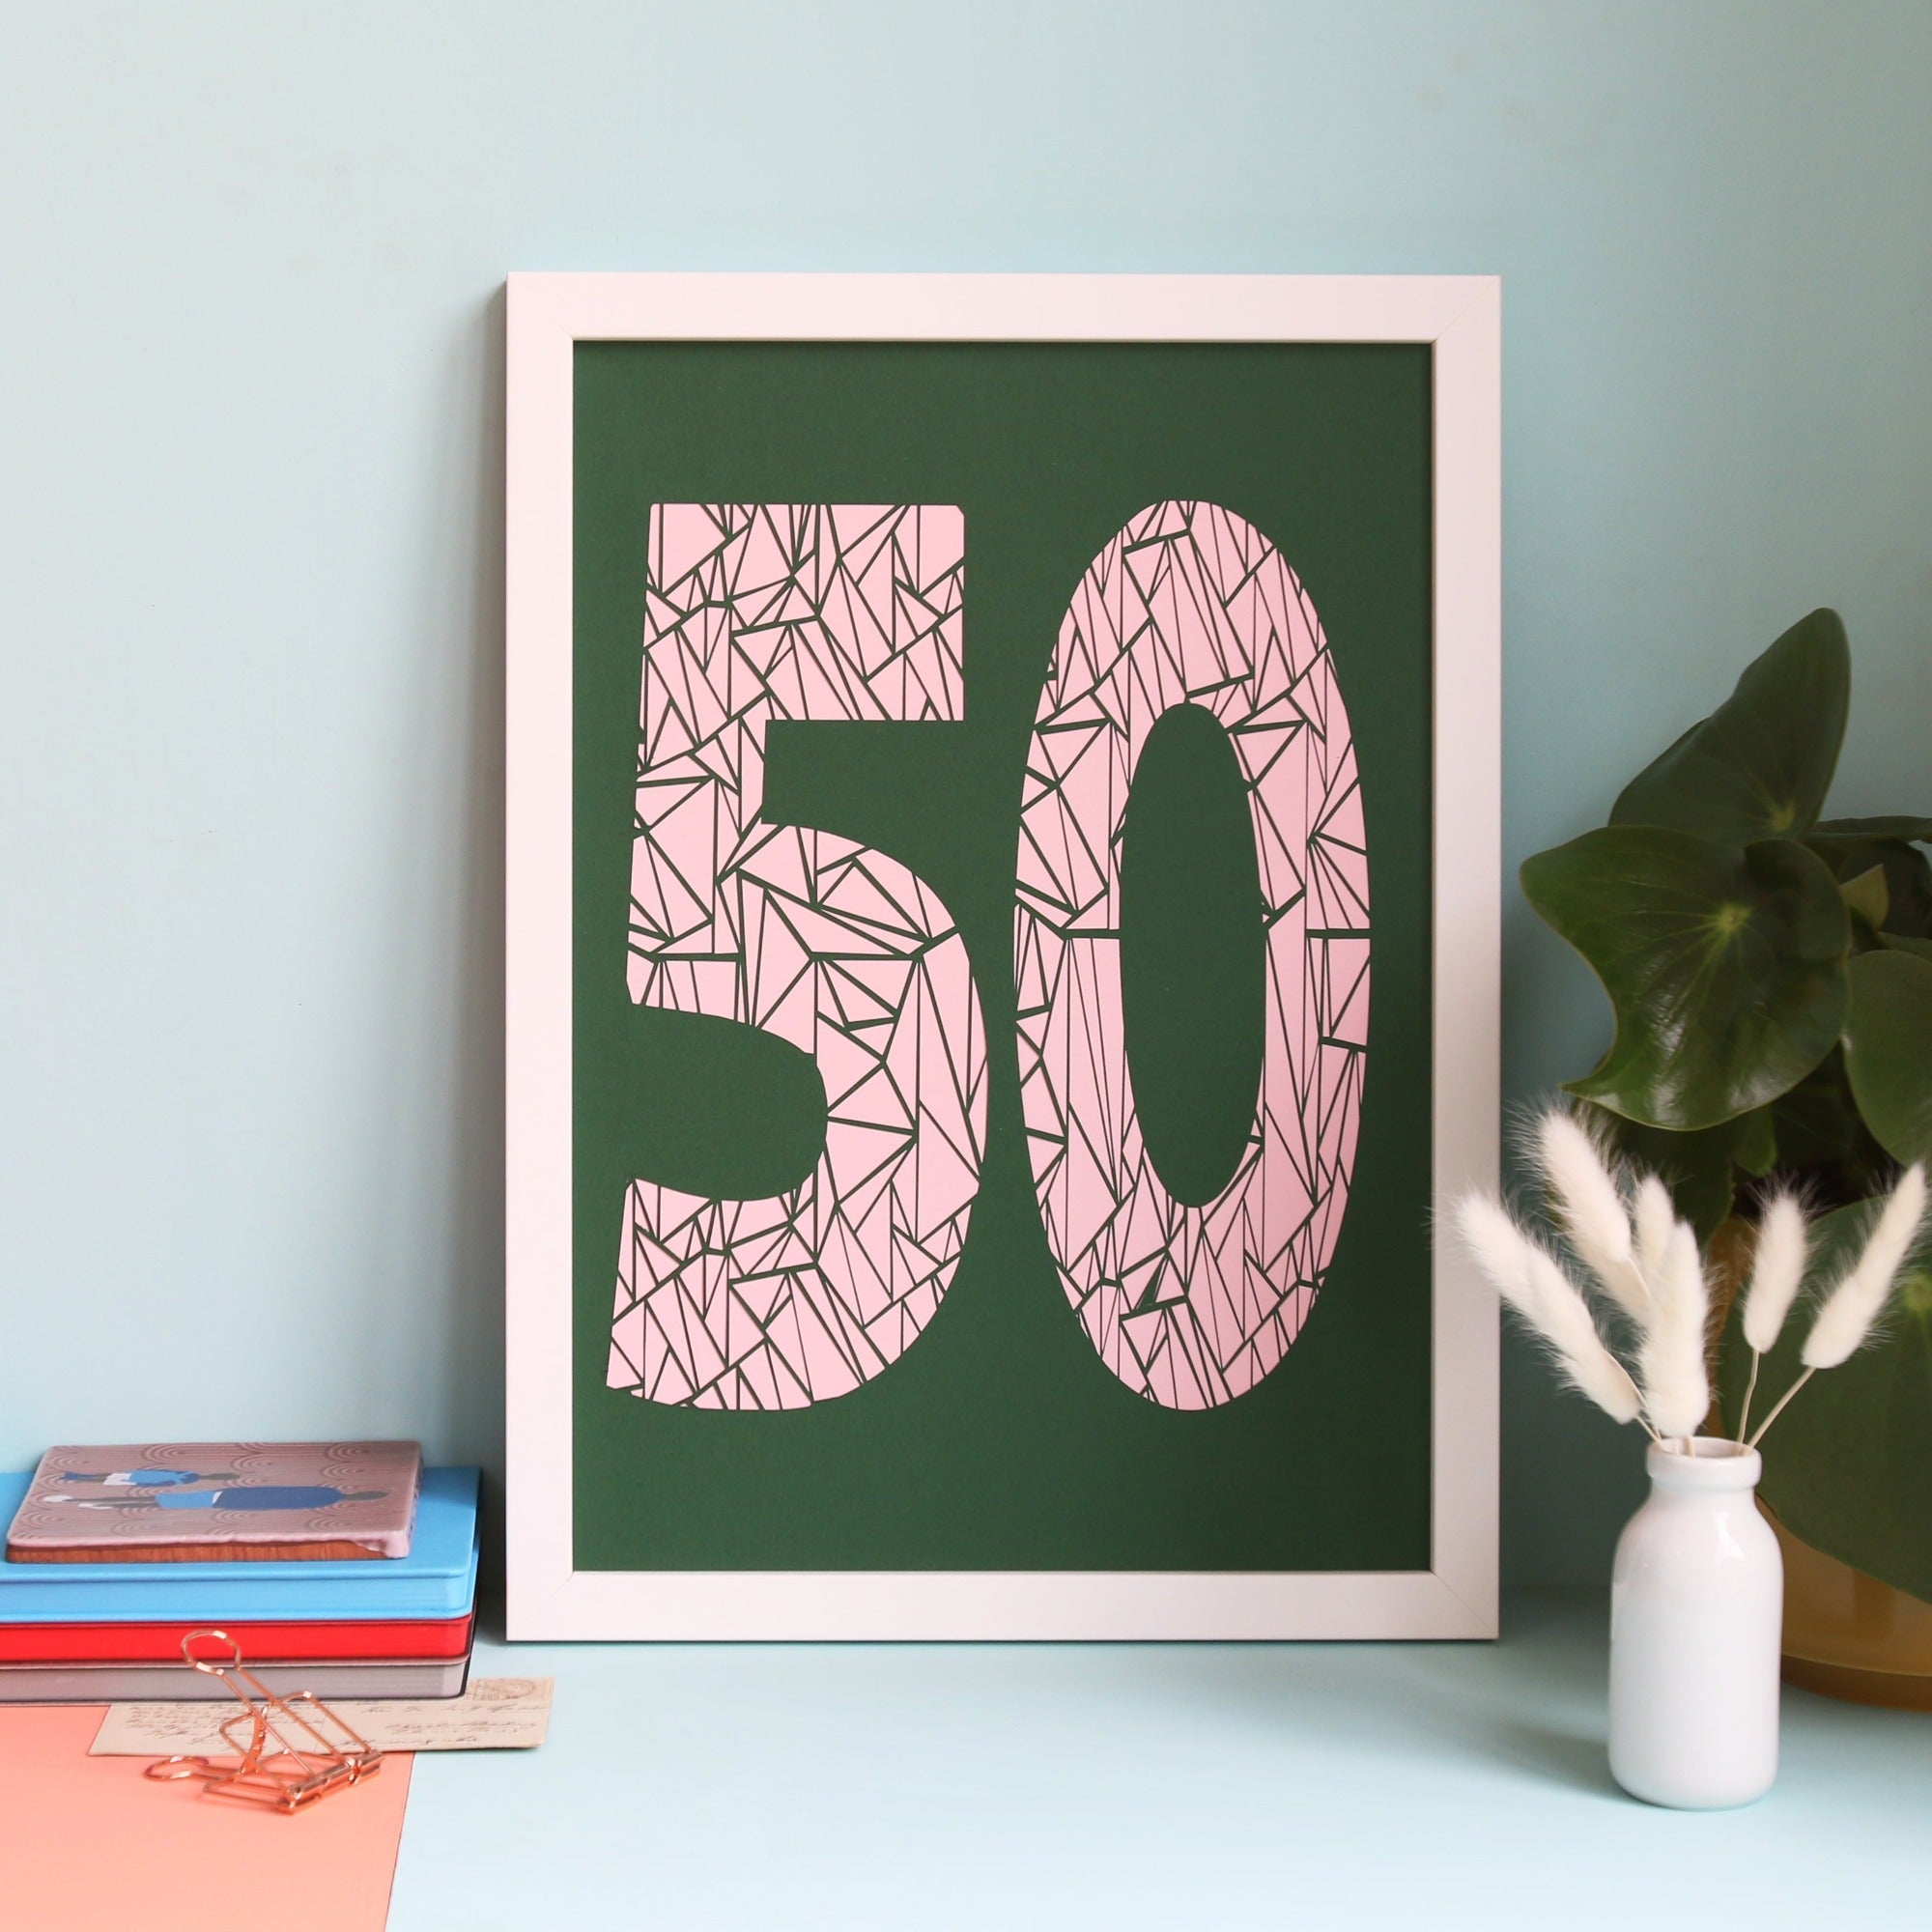 Green papercut with a geometric 50 highlighted in pink